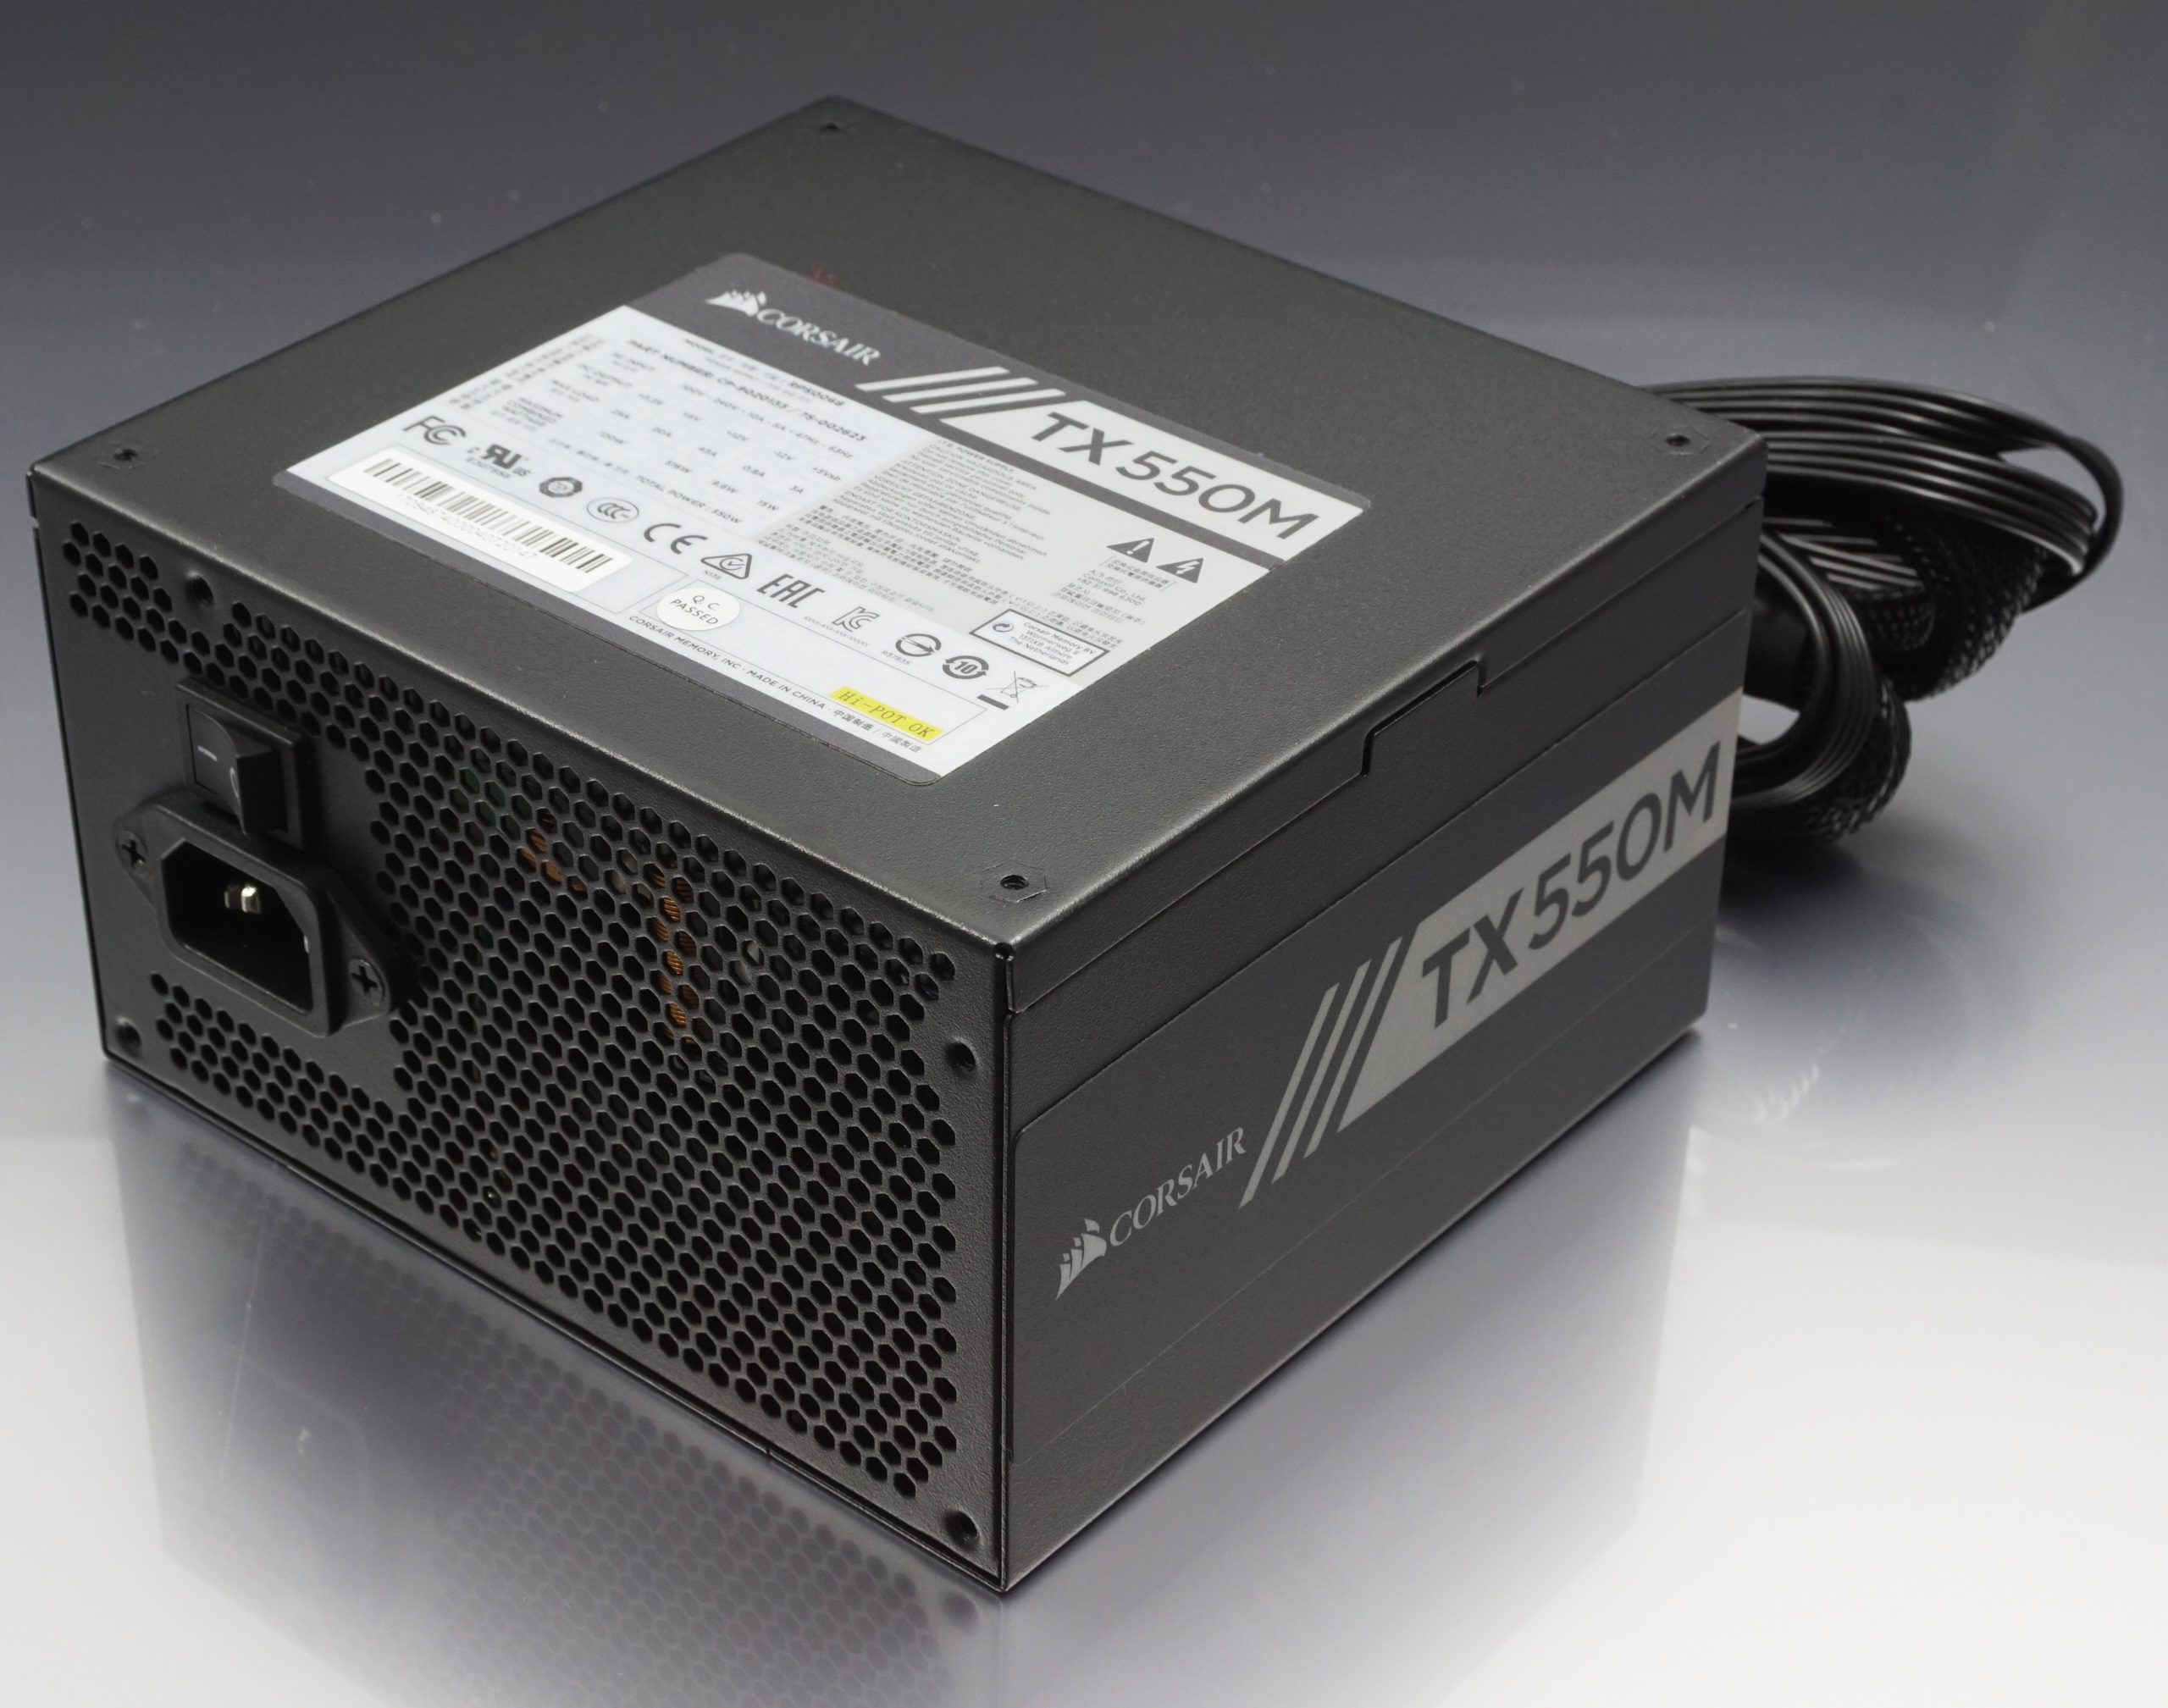 The Corsair TX550M - The $80 Power Supply for Almost Everyone: The Corsair TX550M 80Plus Gold Review